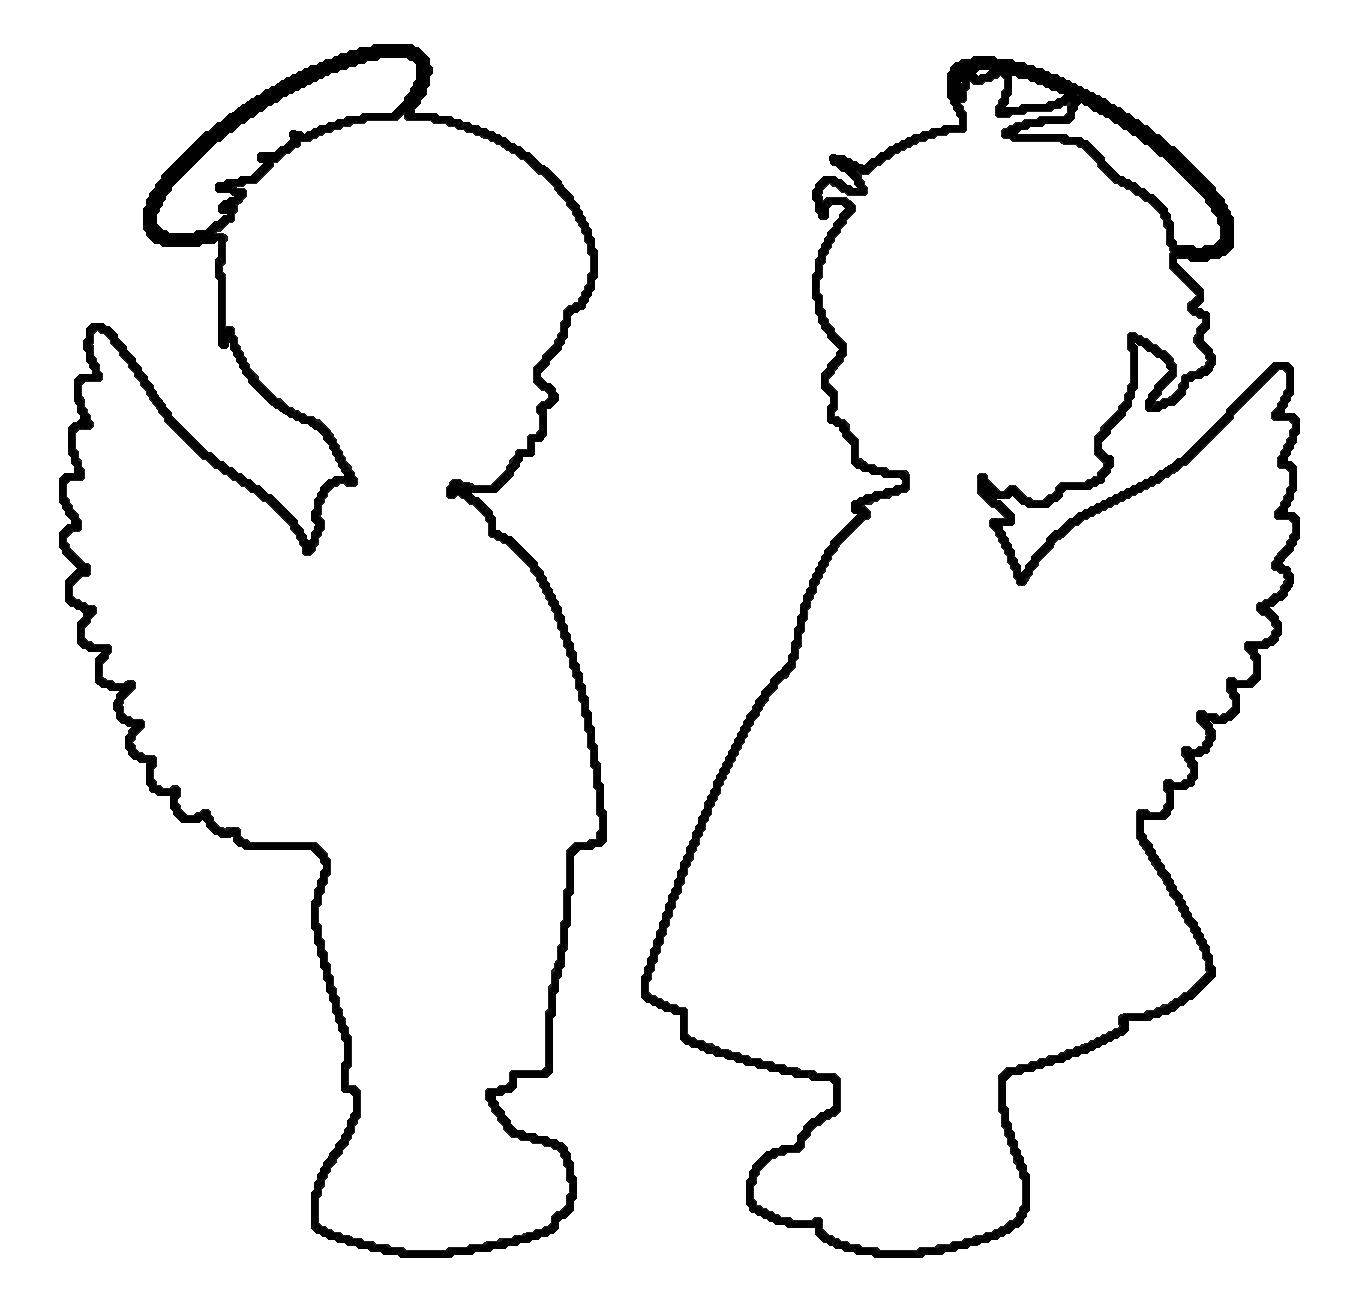 Coloring Angels. Category angels. Tags:  angels.